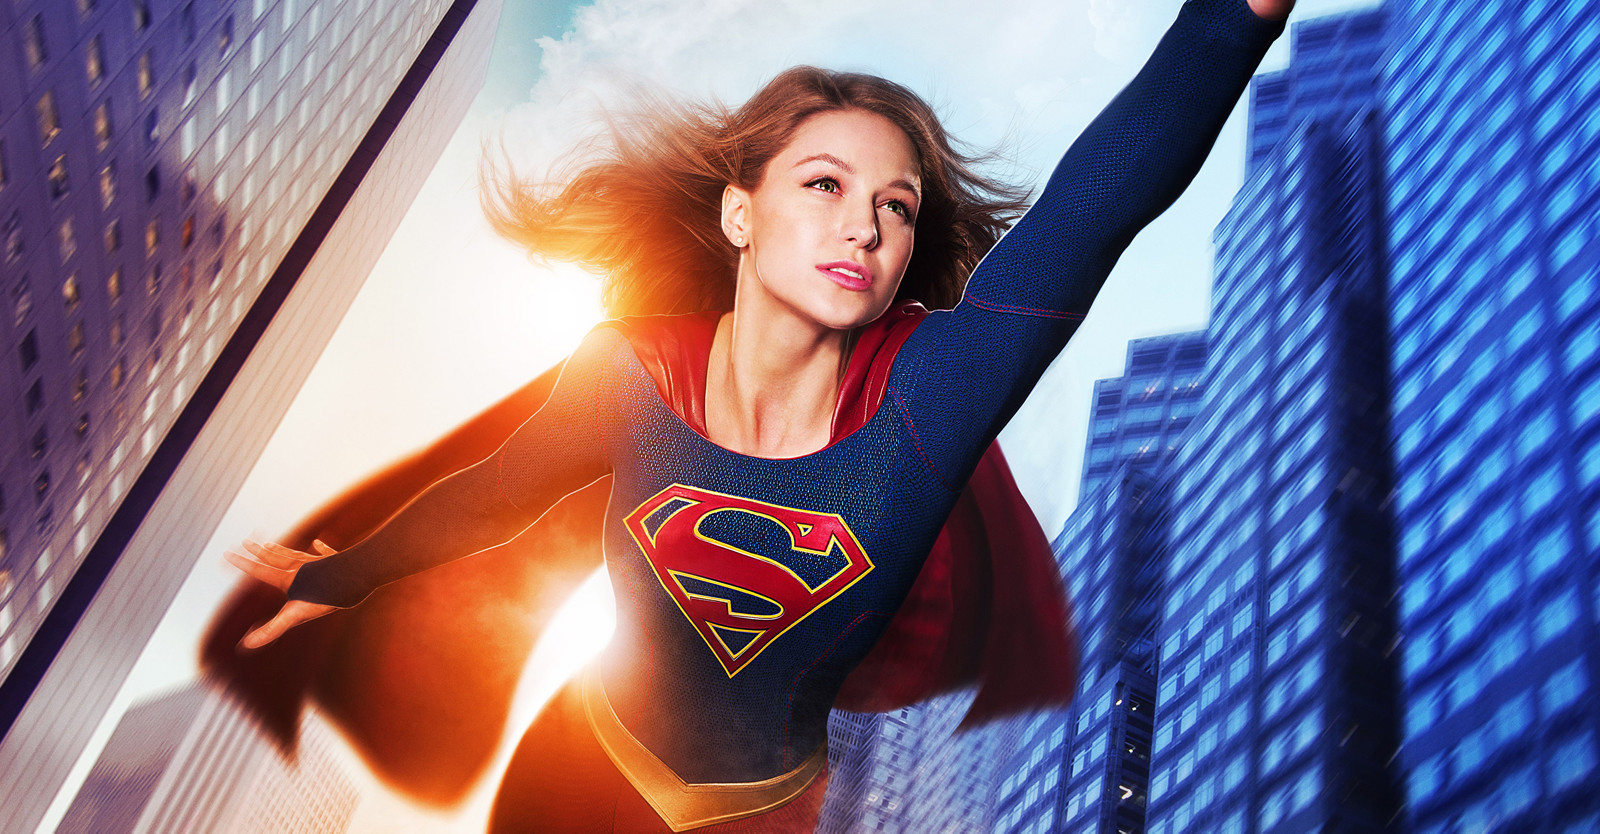 Photo of Supergirl from the CBS TV Show 2015